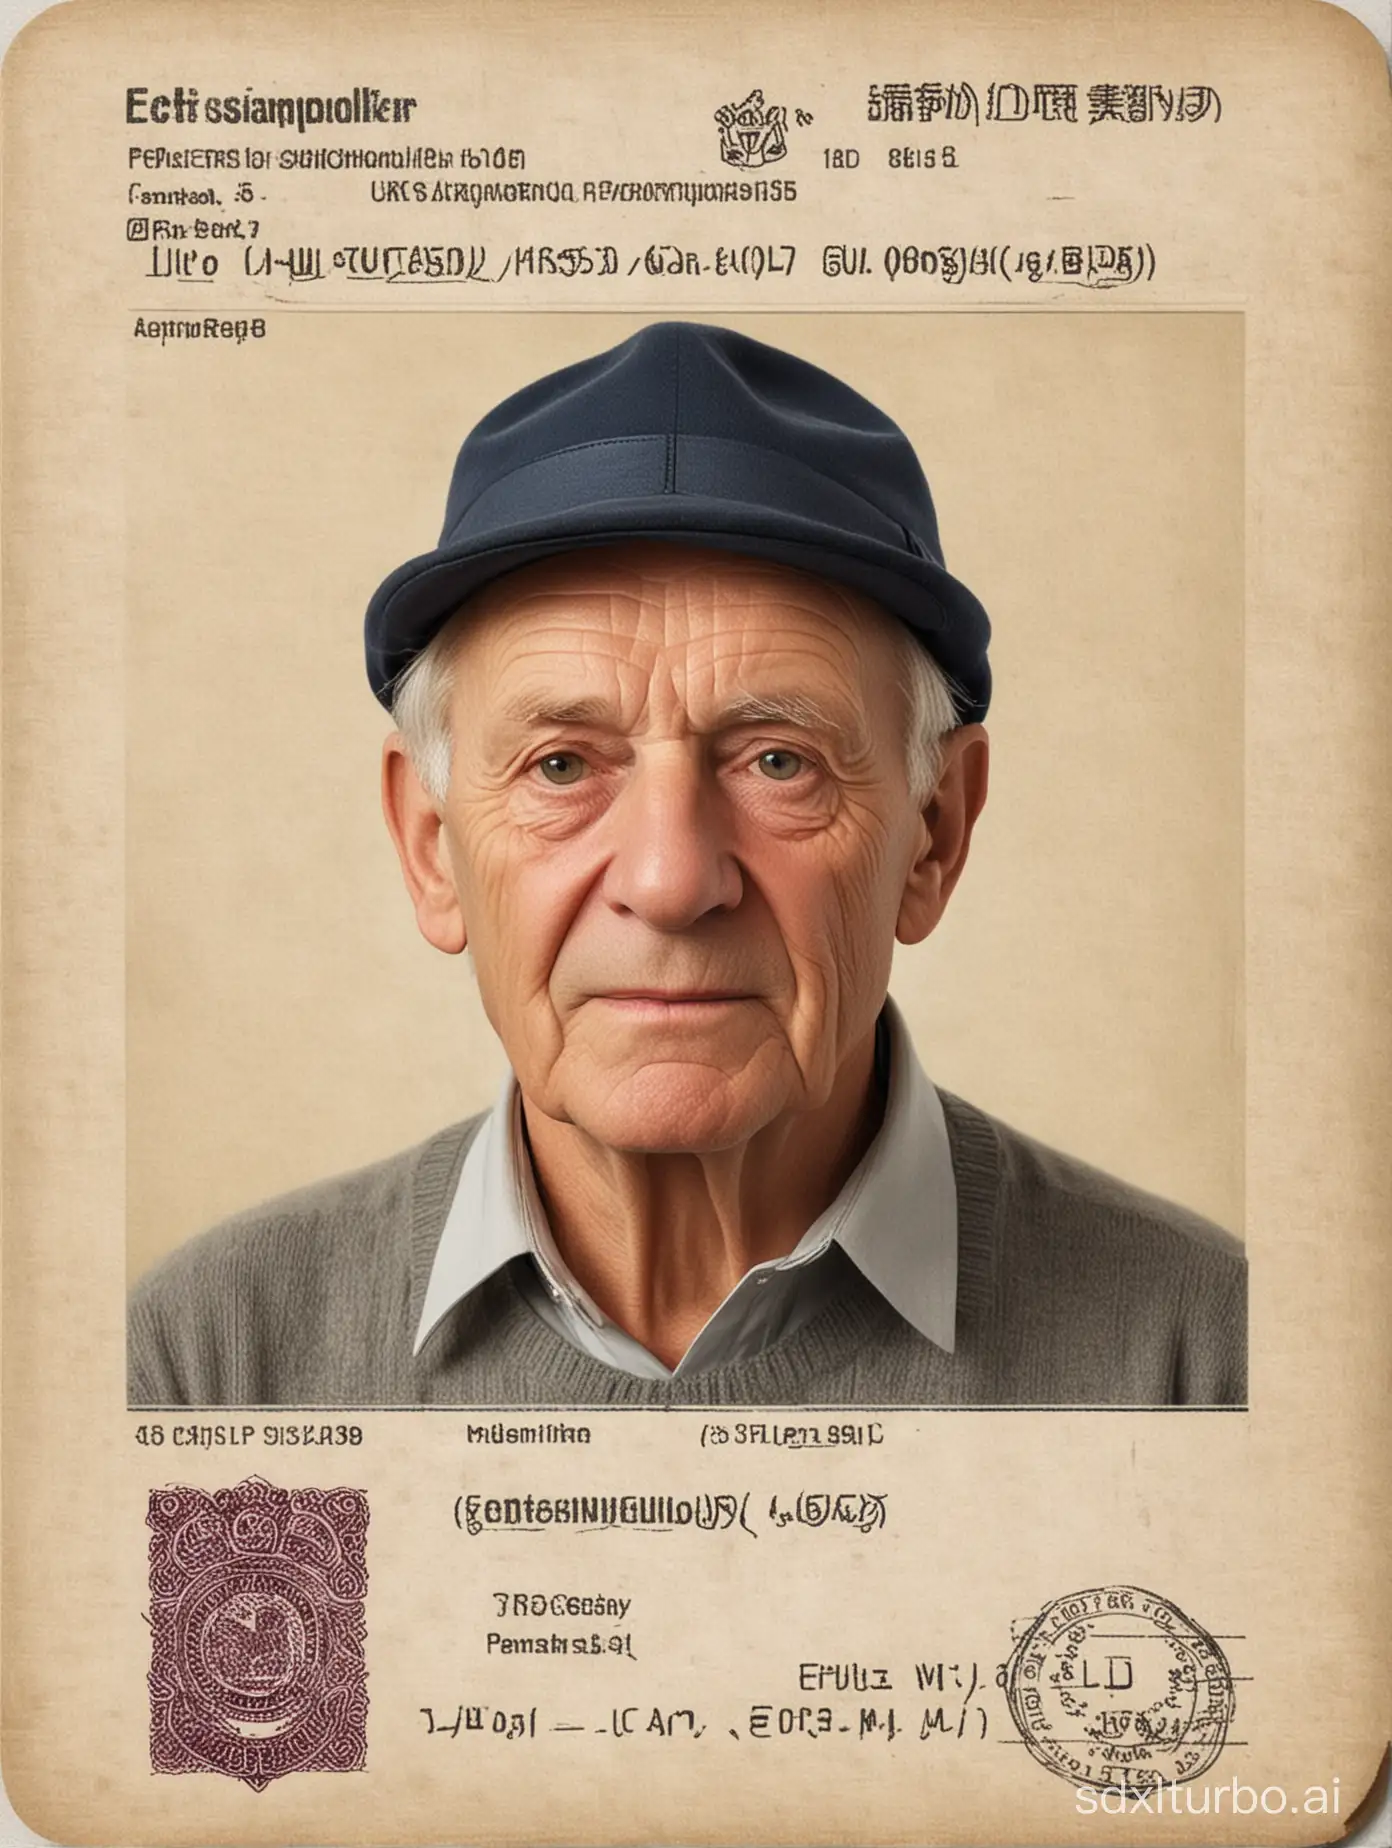 Realistic photo for the passport of a 65-year-old pensioner who has worked in construction all his life